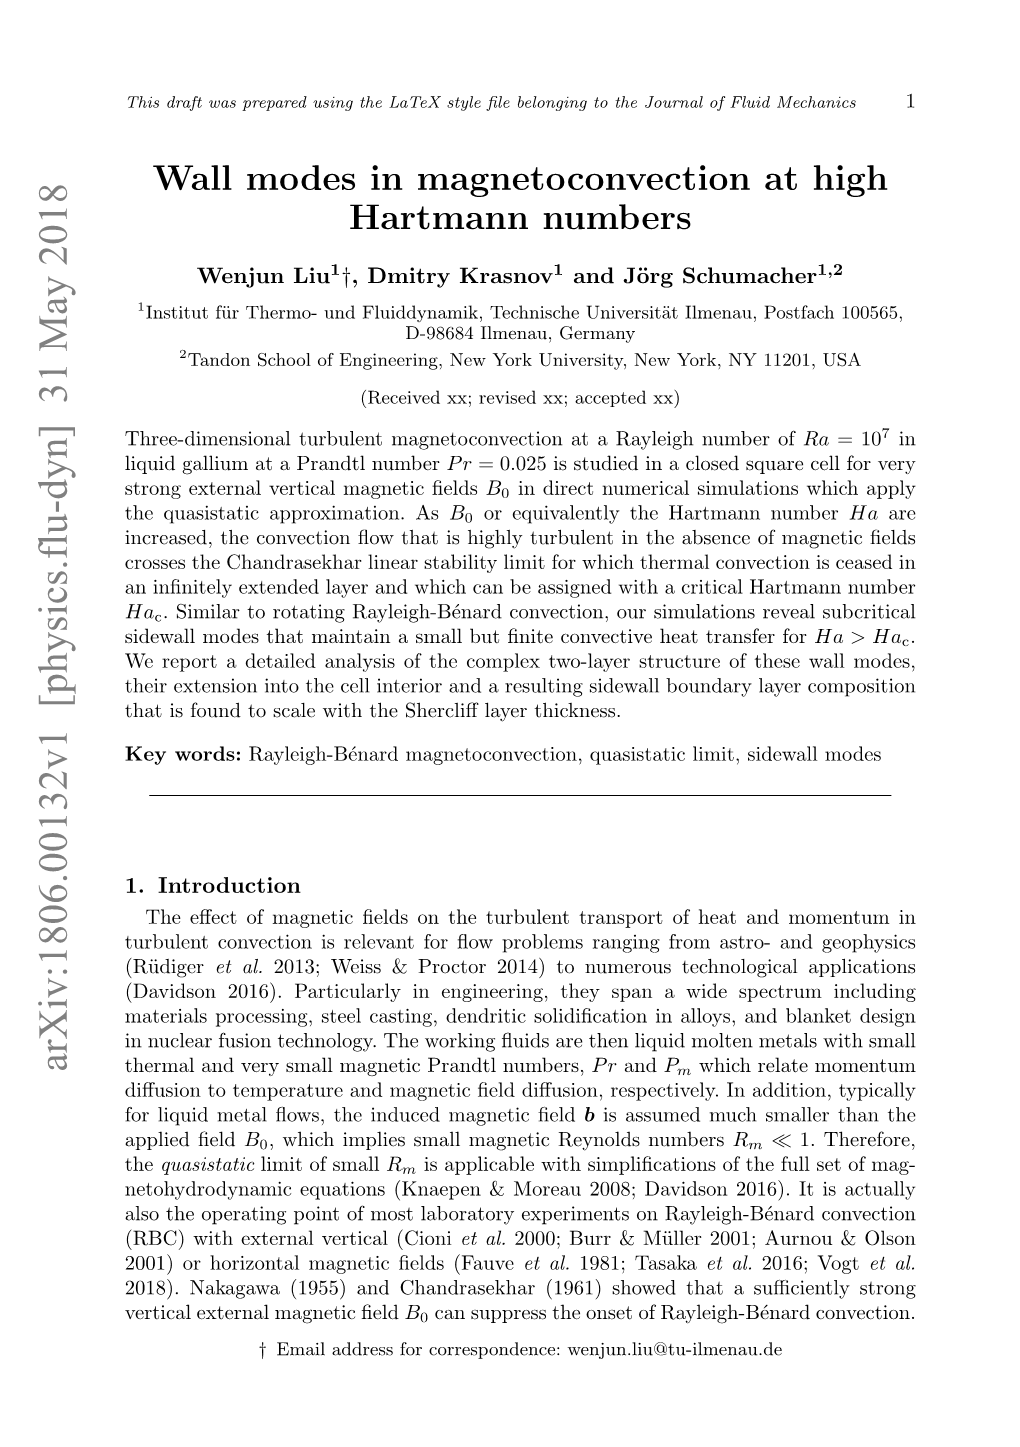 Wall Modes in Magnetoconvection at High Hartmann Numbers